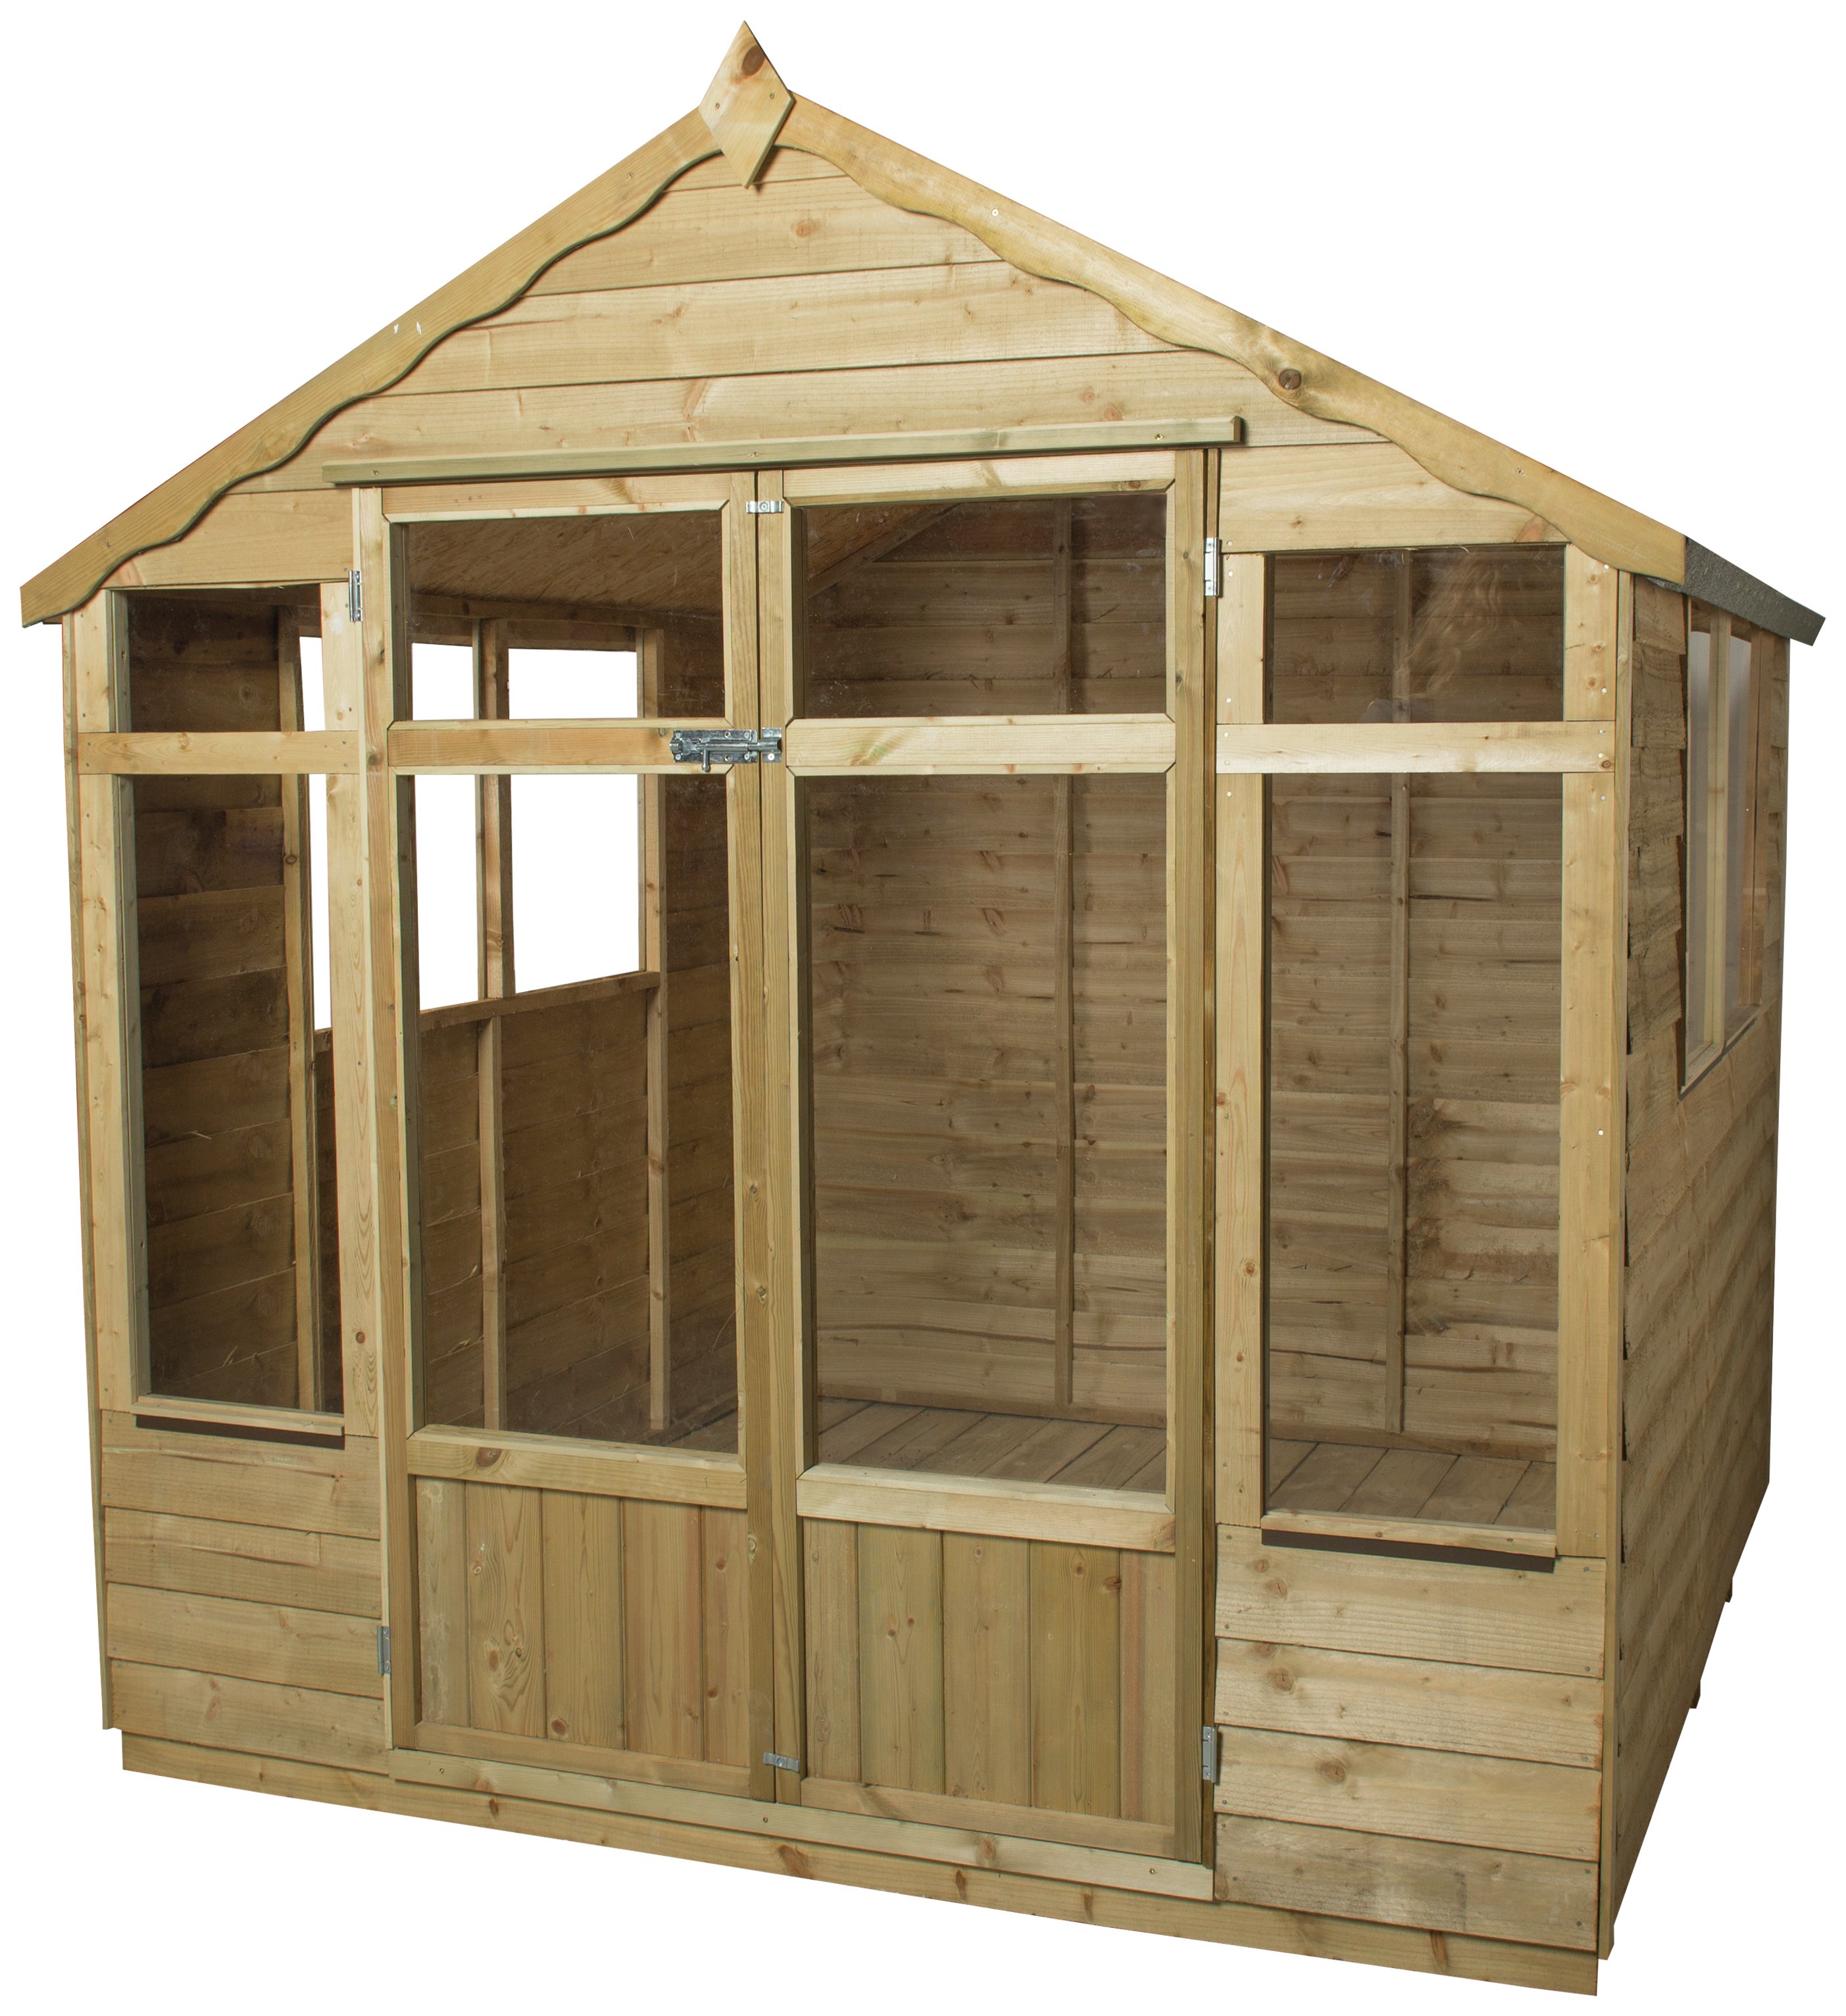 Forest Oakley Summerhouse 7 x 7ft. at Argos review